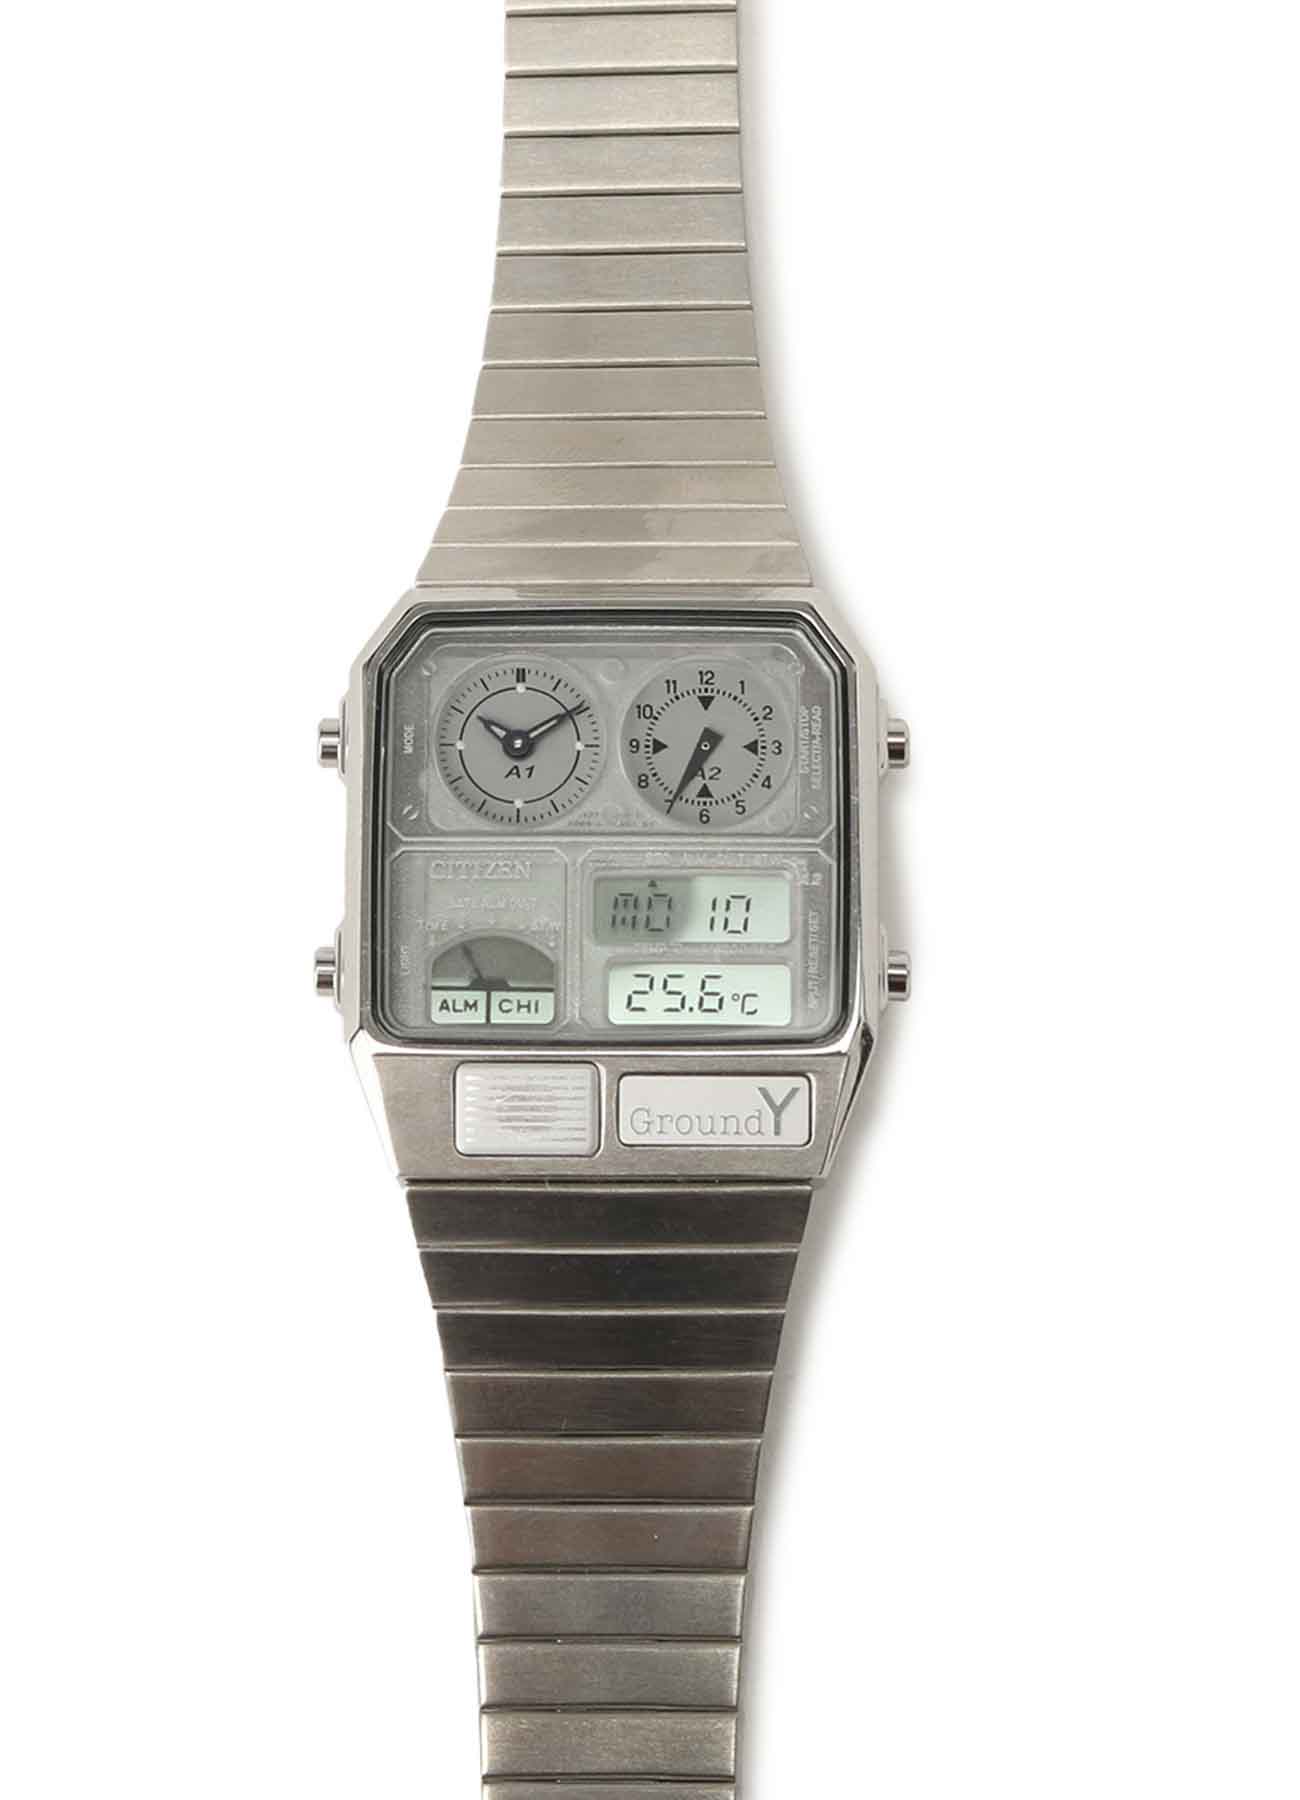 【Ground Y×CITIZEN】 ANA-DEGI TEMP Silver with serial number【Limited】